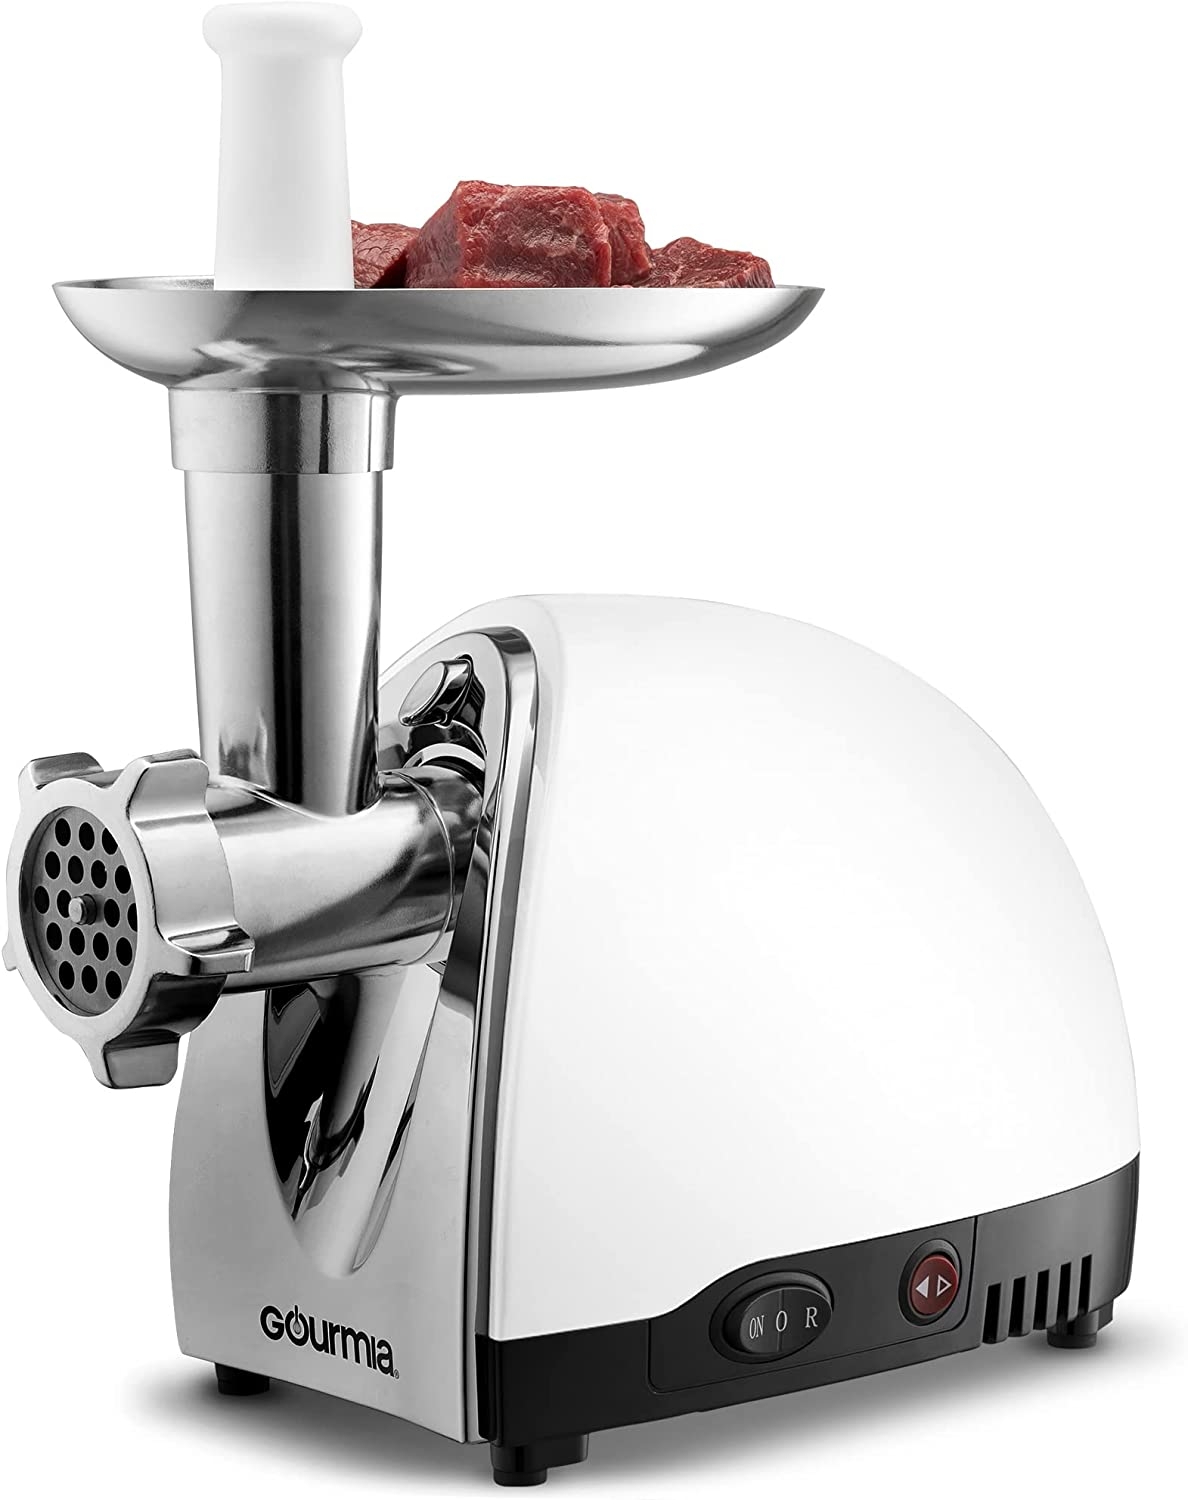 Gourmia Electric Meat Grinder 500 Watt 3 Stainless steel grind plates fine to coarse commercial meat grinder machine white and